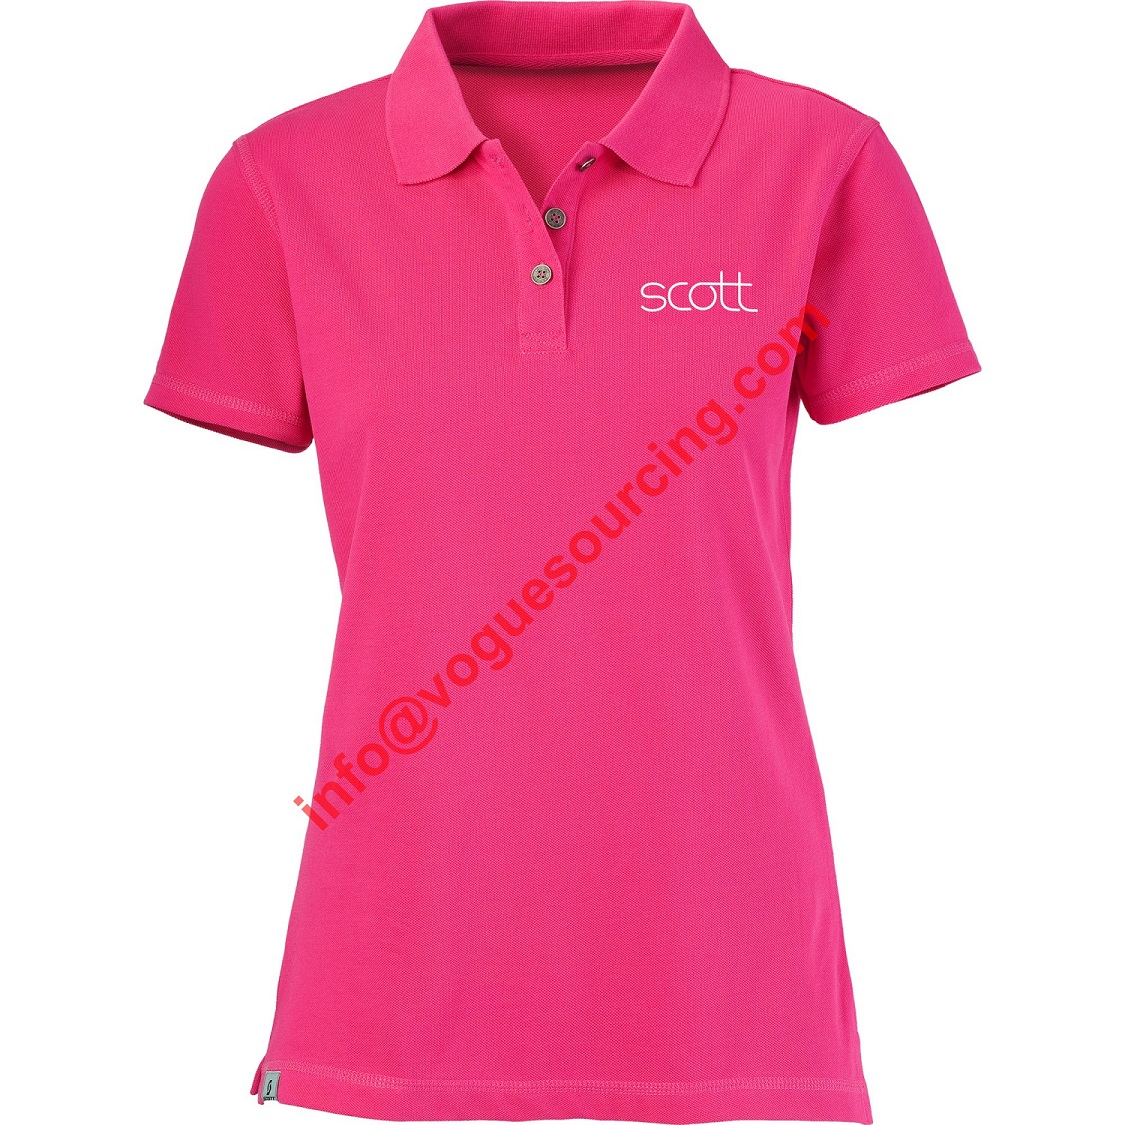 women-s-polo-t-shirt-manufacturers-suppliers-exporters-voguesourcing-tirupur-india